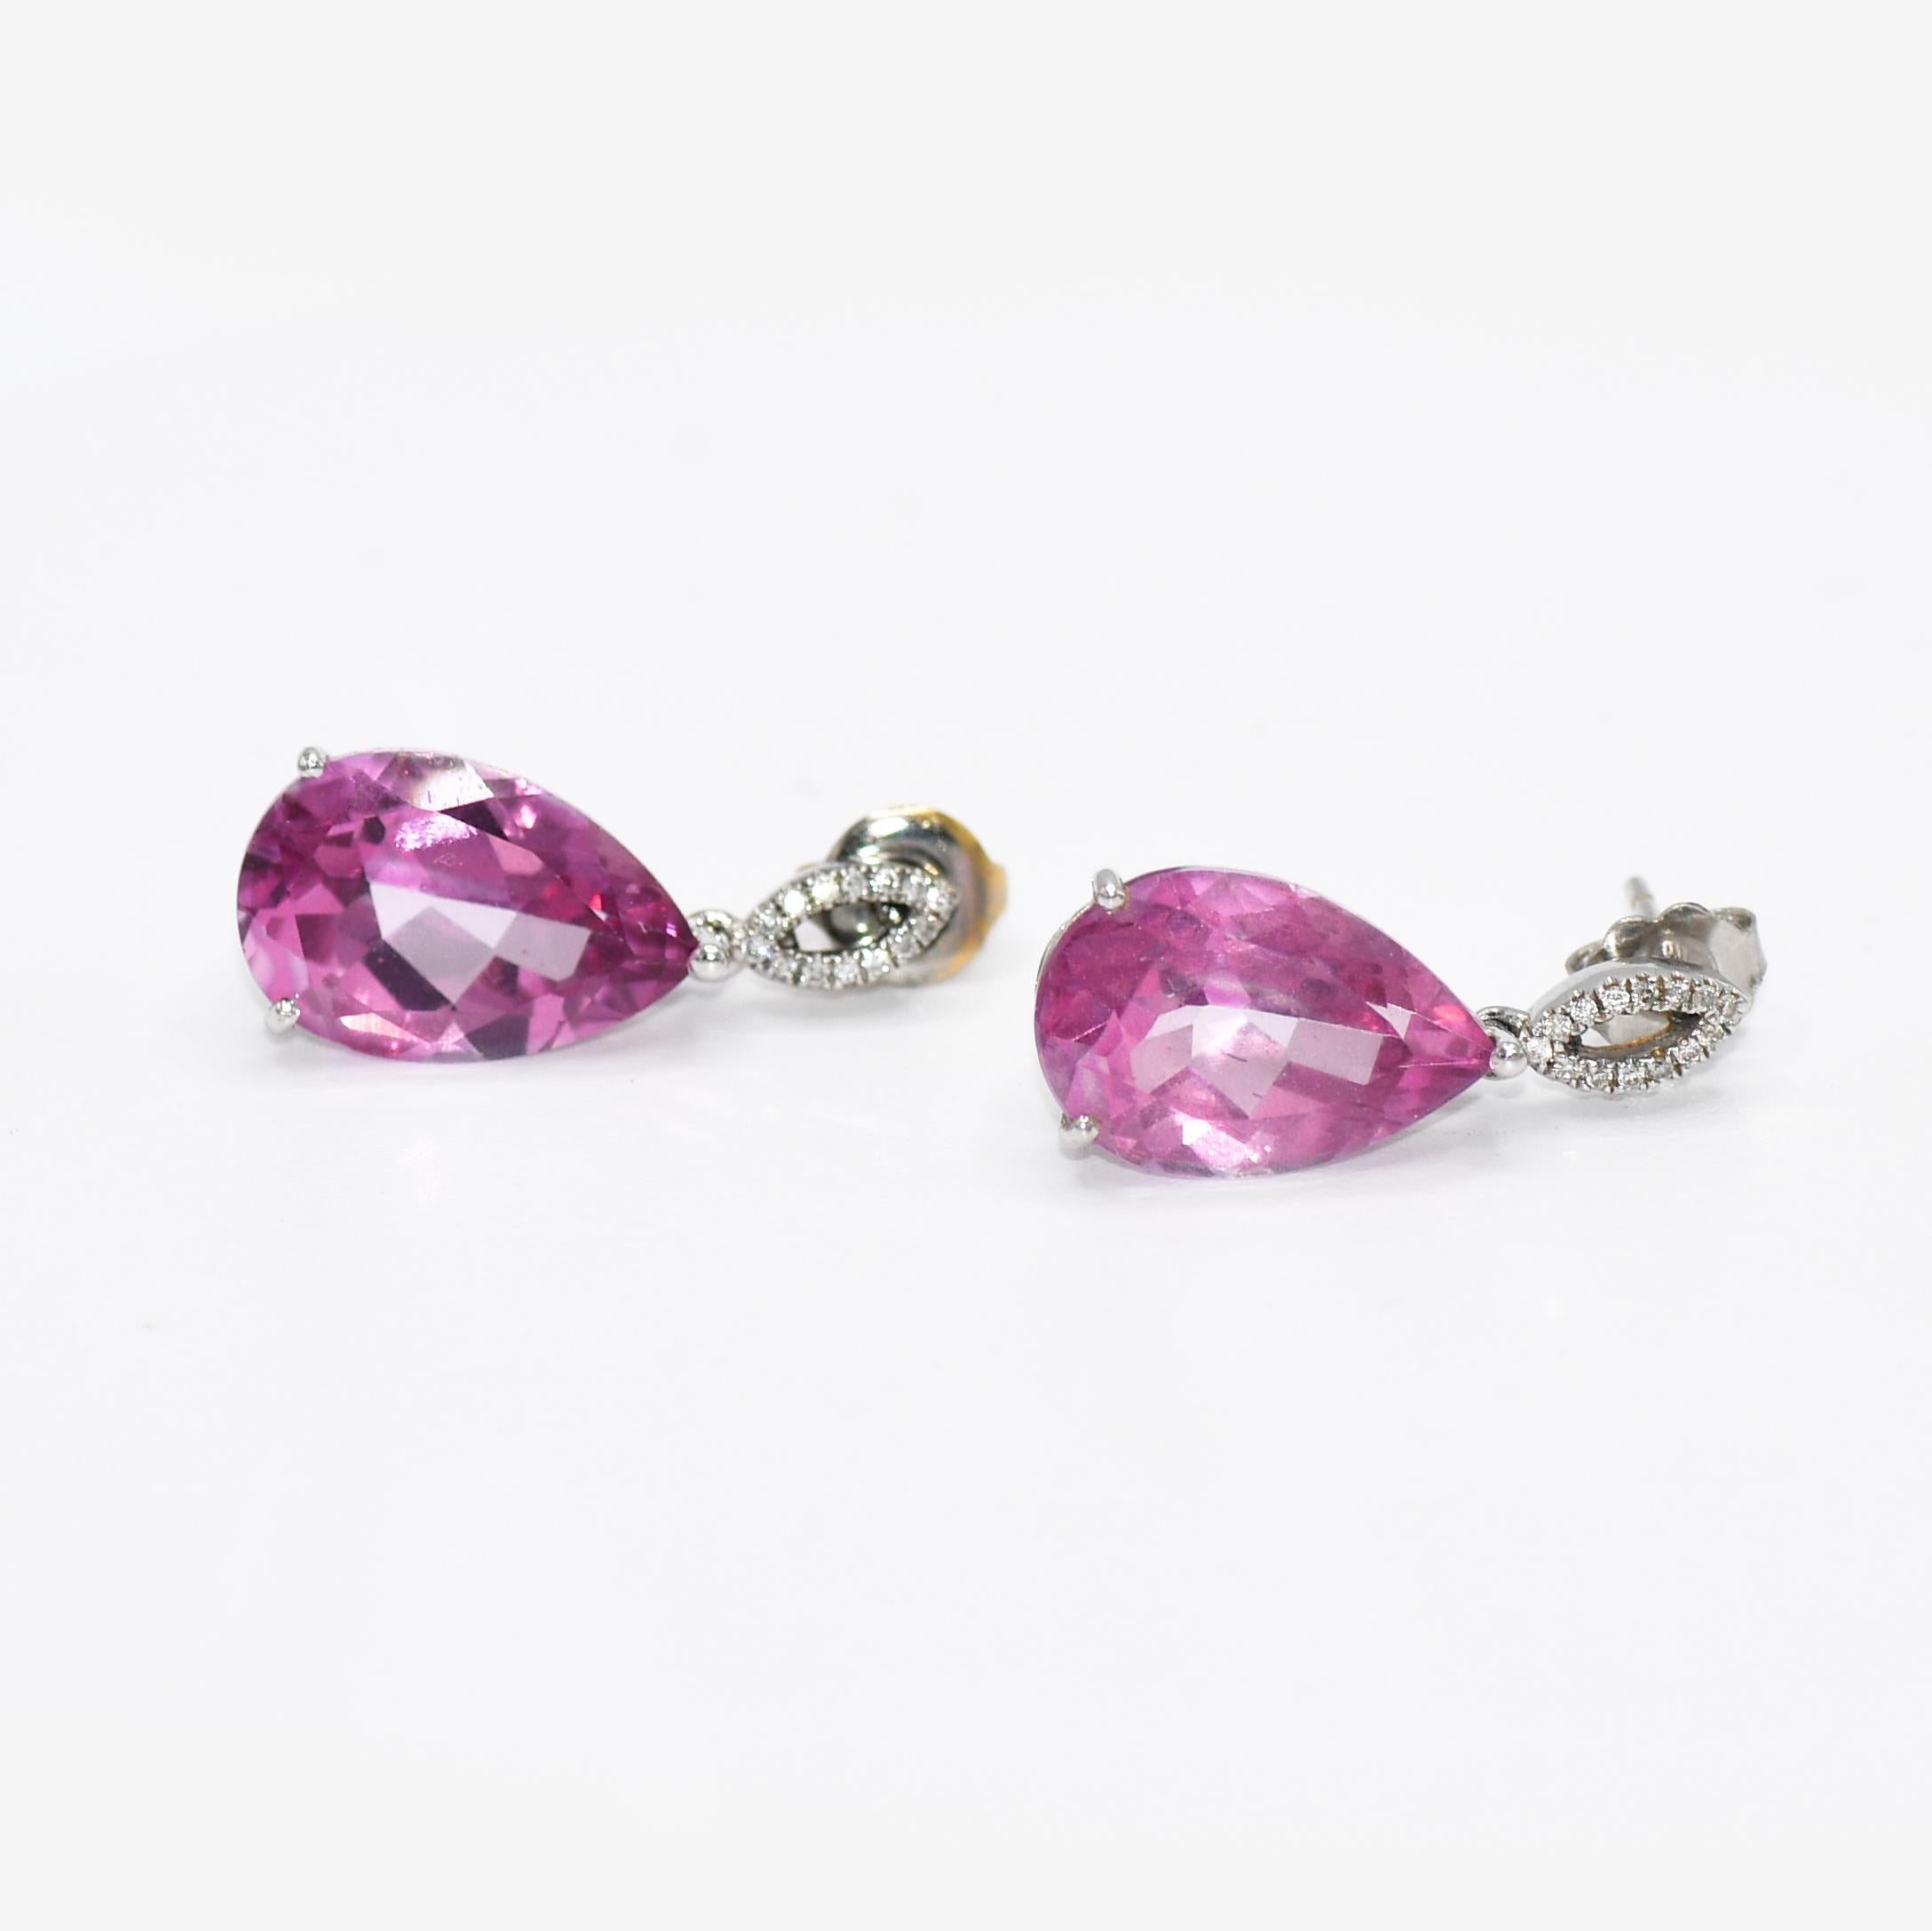 14K White Gold Pink Lab Topaz & Diamond Earrings, 15.00tcw, 6.8g
Pink topaz and diamond dangle earrings with 14k white gold settings.
Stamped 14k and weigh 6.8 grams gross weight, net 3.8 grams of 14k gold.
The topaz is lab treated to create a pink